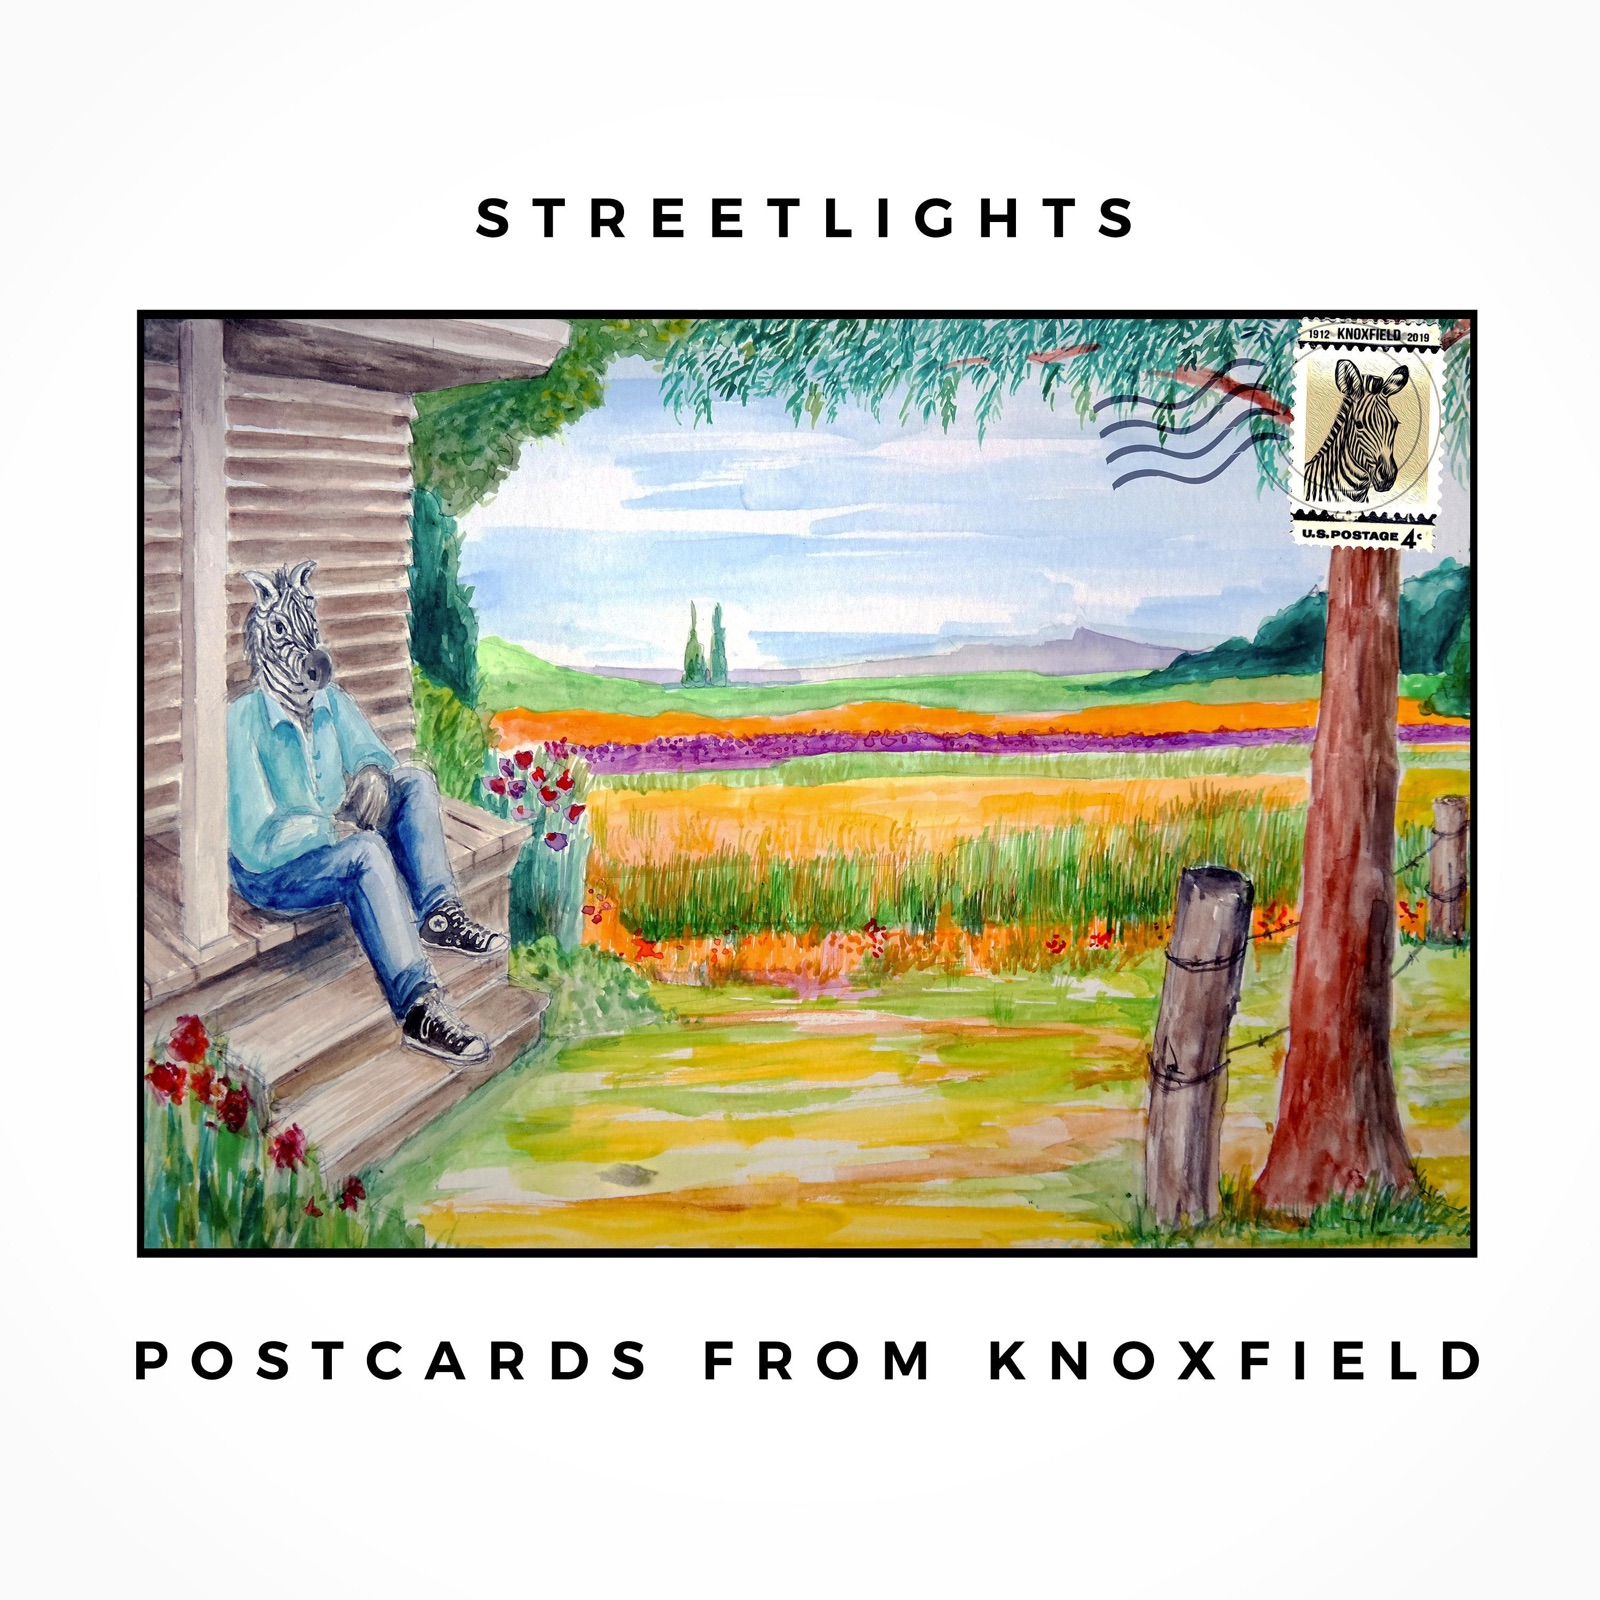 Postcards from Knoxfield